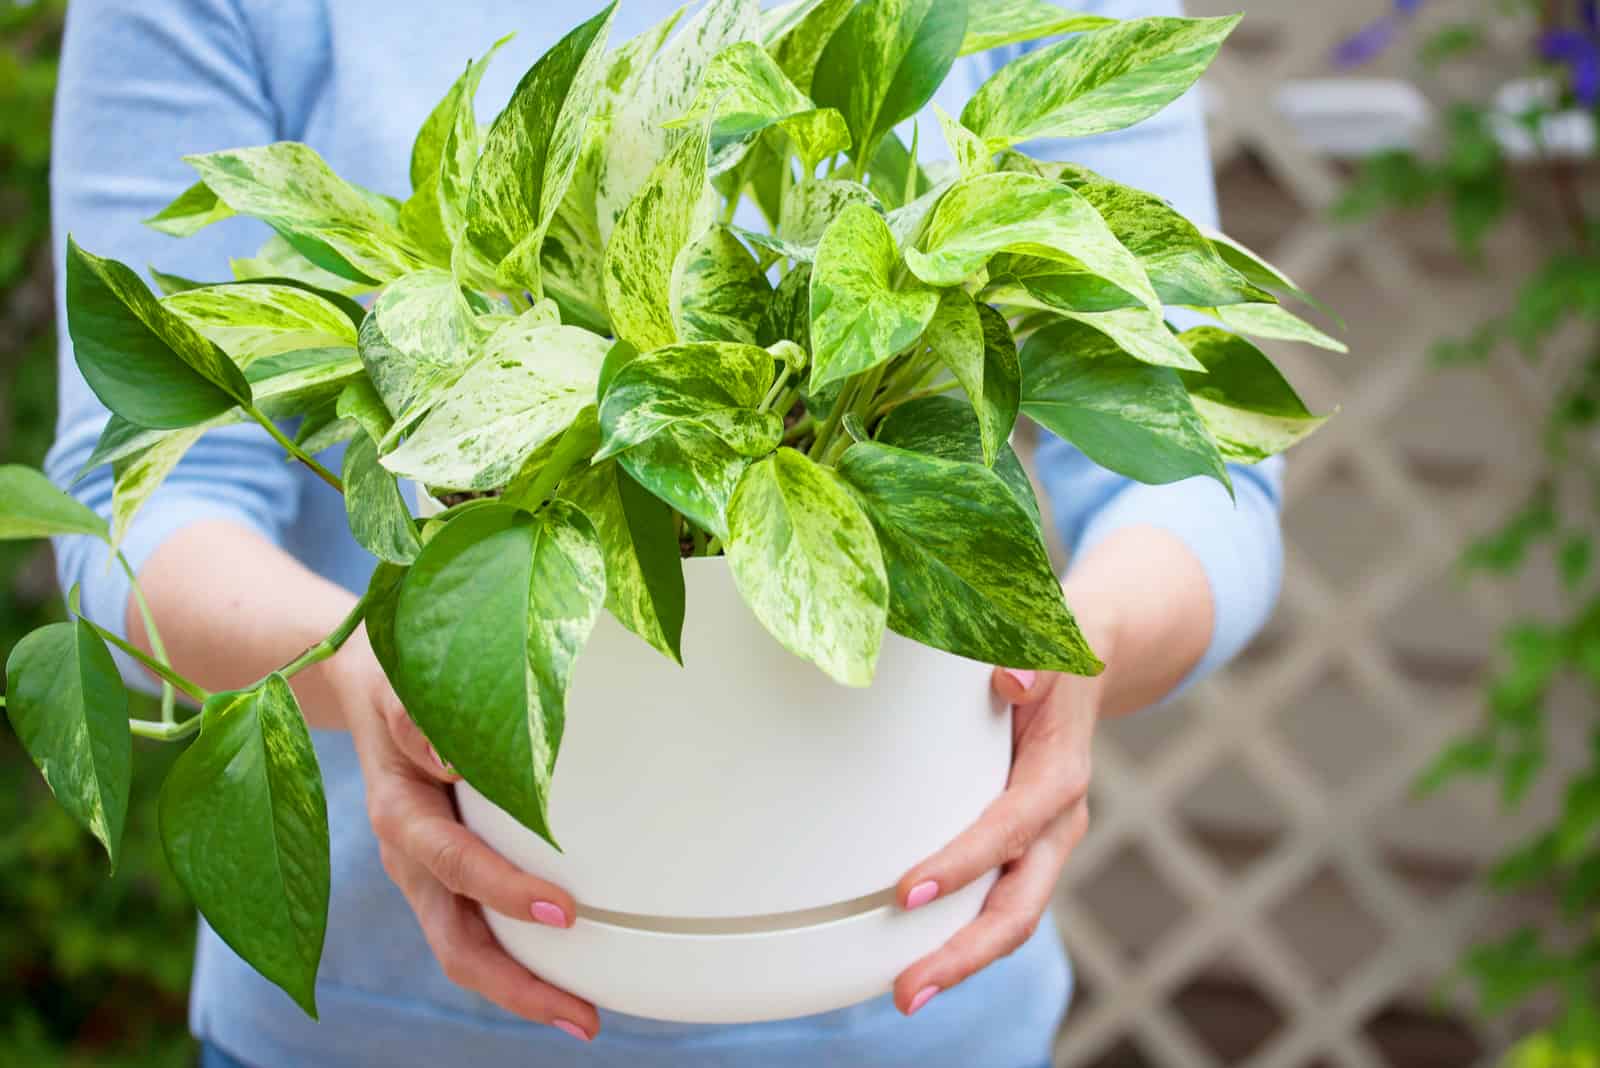 How To Grow Trailing Pothos: 7 Solutions To Get Pothos To Trail